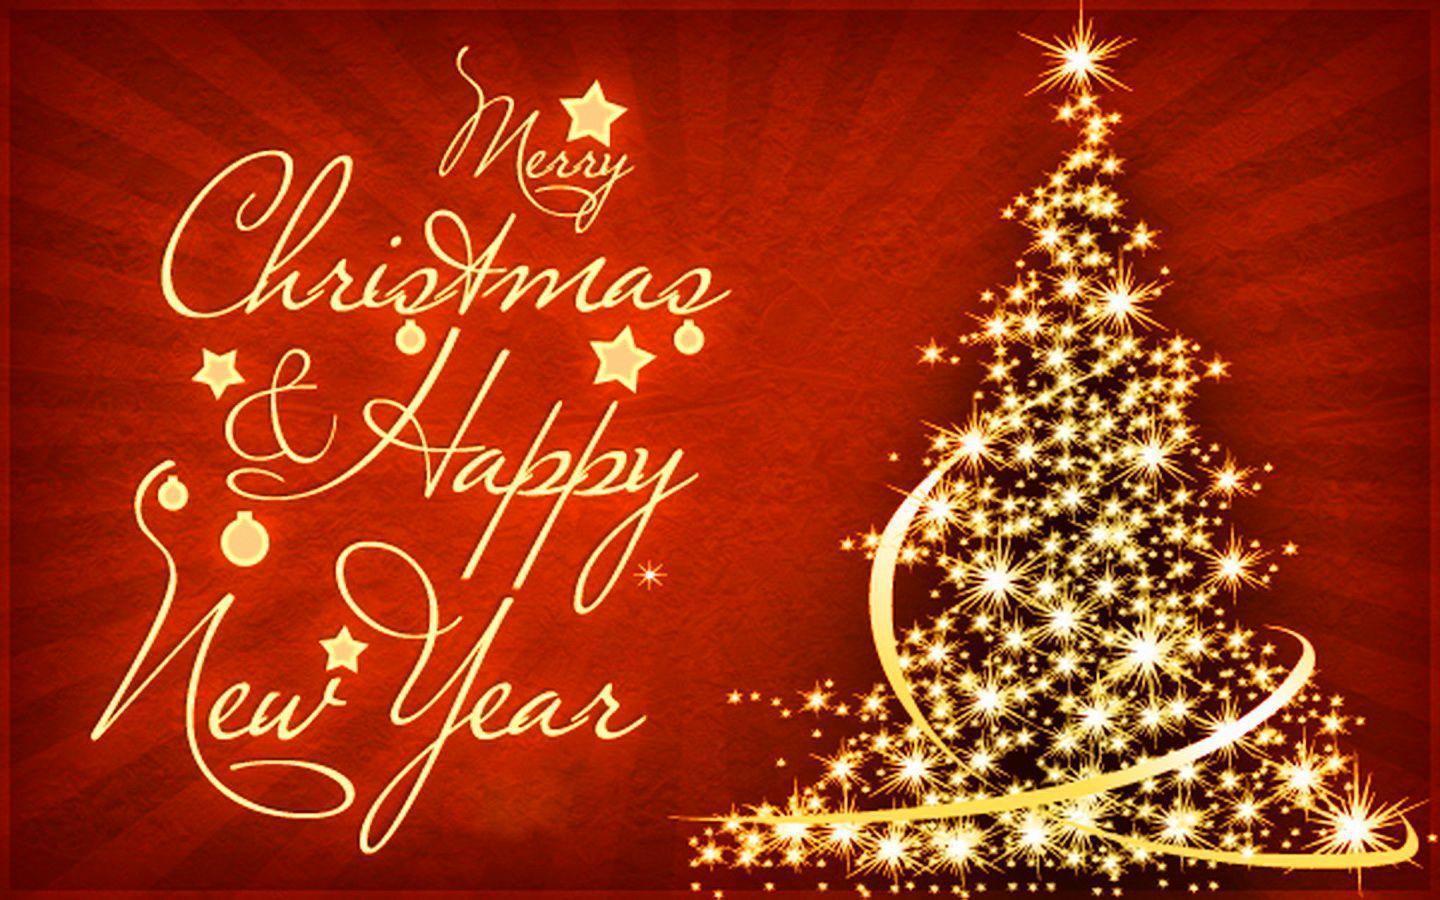 Merry Christmas and Happy New Year 2017 Wishes, Image